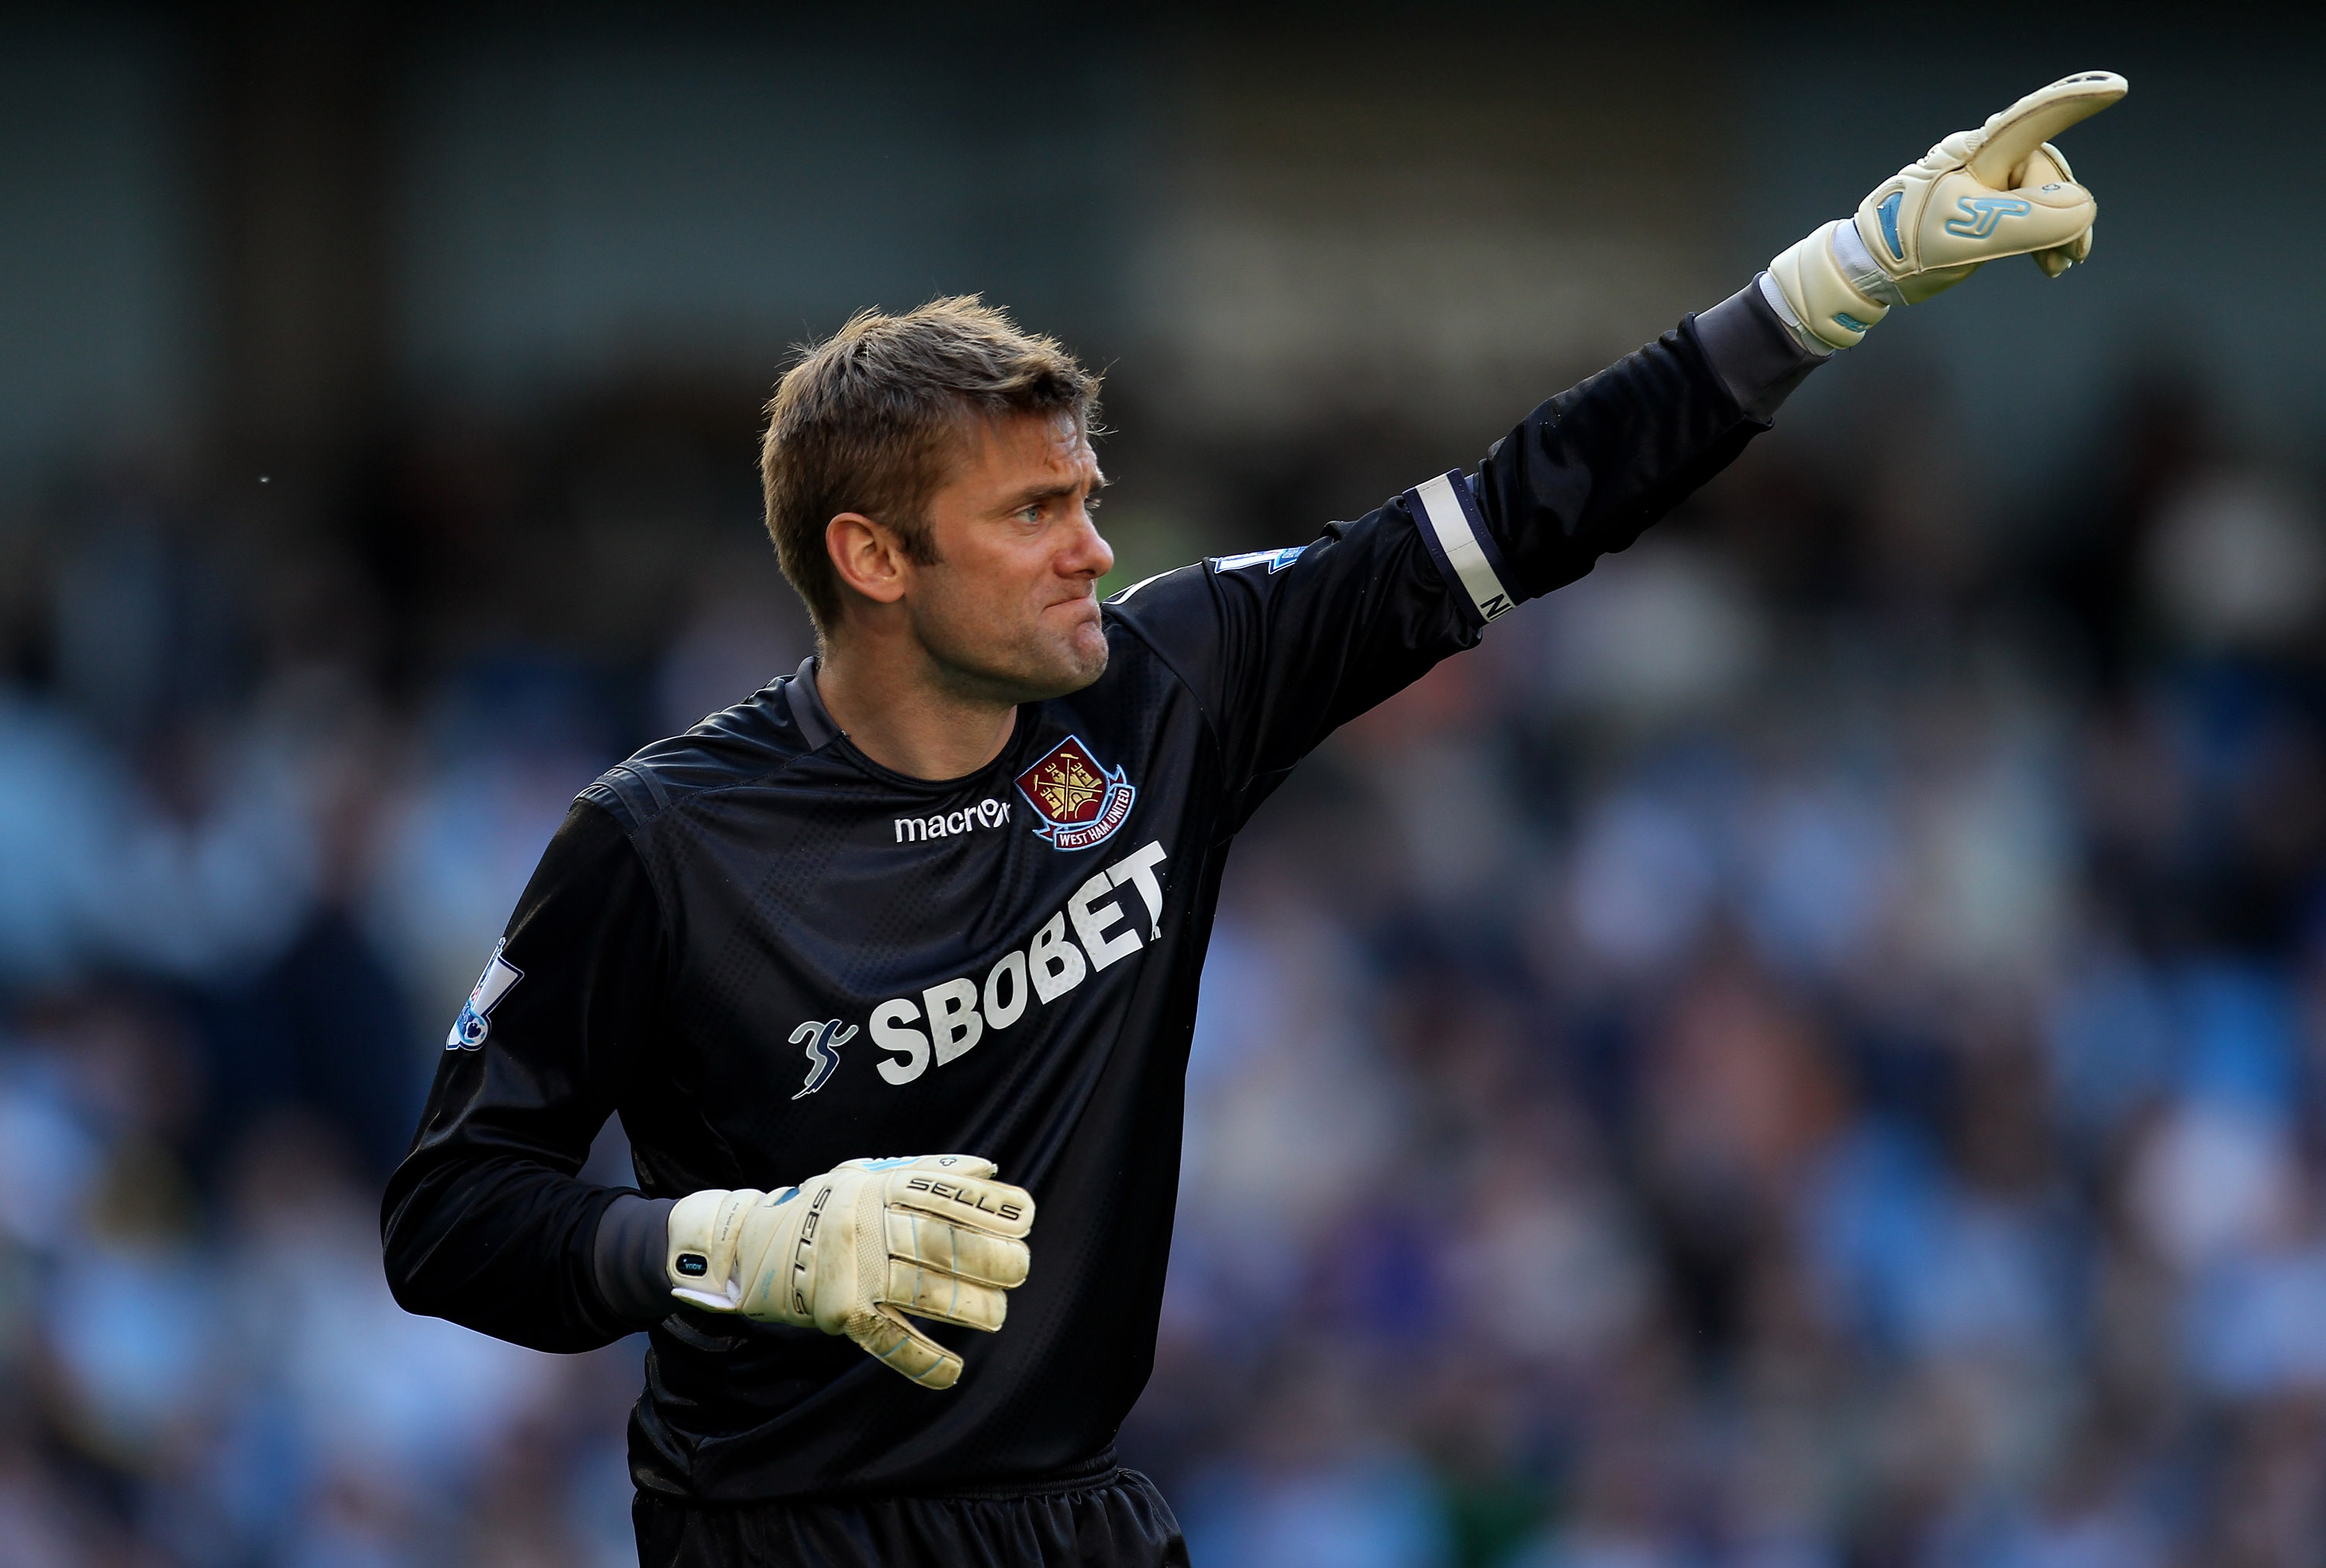 MANCHESTER, ENGLAND - MAY 01:  Robert Green of West Ham United gestures during the Barclays Premier League match between Manchester City and West Ham United at the City of Manchester Stadium on May 1, 2011 in Manchester, England.  (Photo by Alex Livesey/G